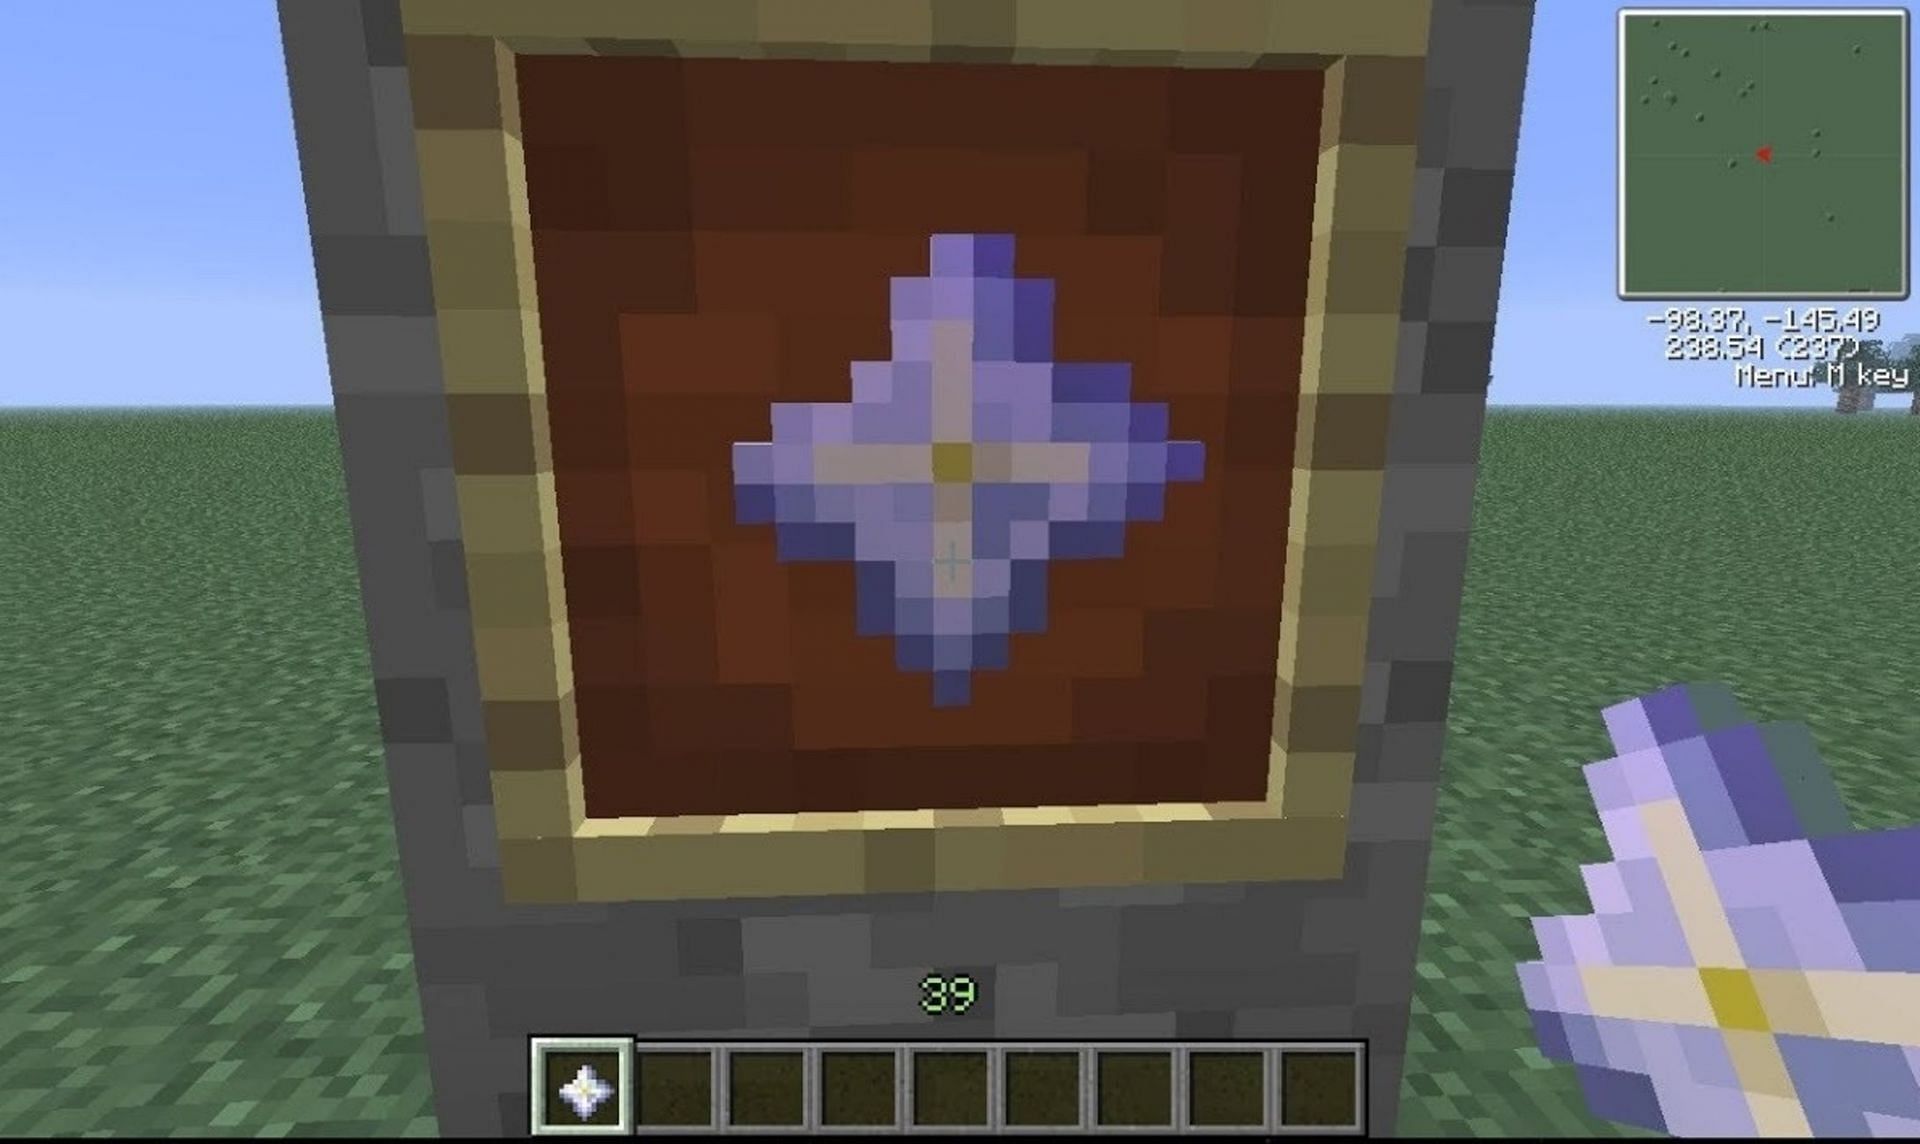 Nether stars can only be obtained from the Wither boss in Survival Mode (Image via Mojang)